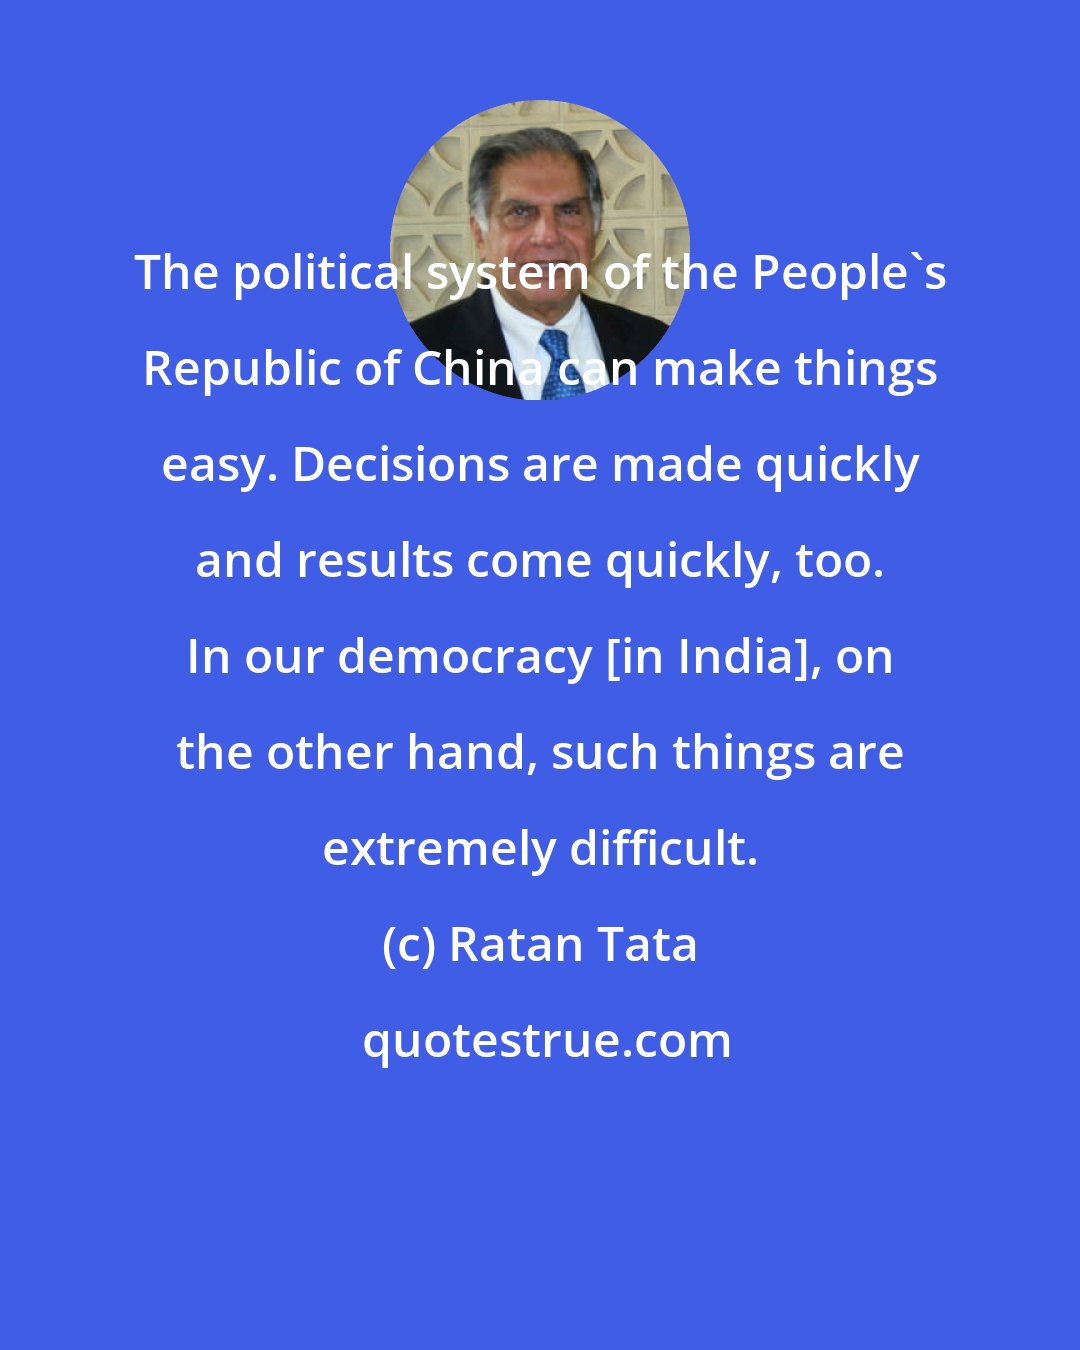 Ratan Tata: The political system of the People's Republic of China can make things easy. Decisions are made quickly and results come quickly, too. In our democracy [in India], on the other hand, such things are extremely difficult.